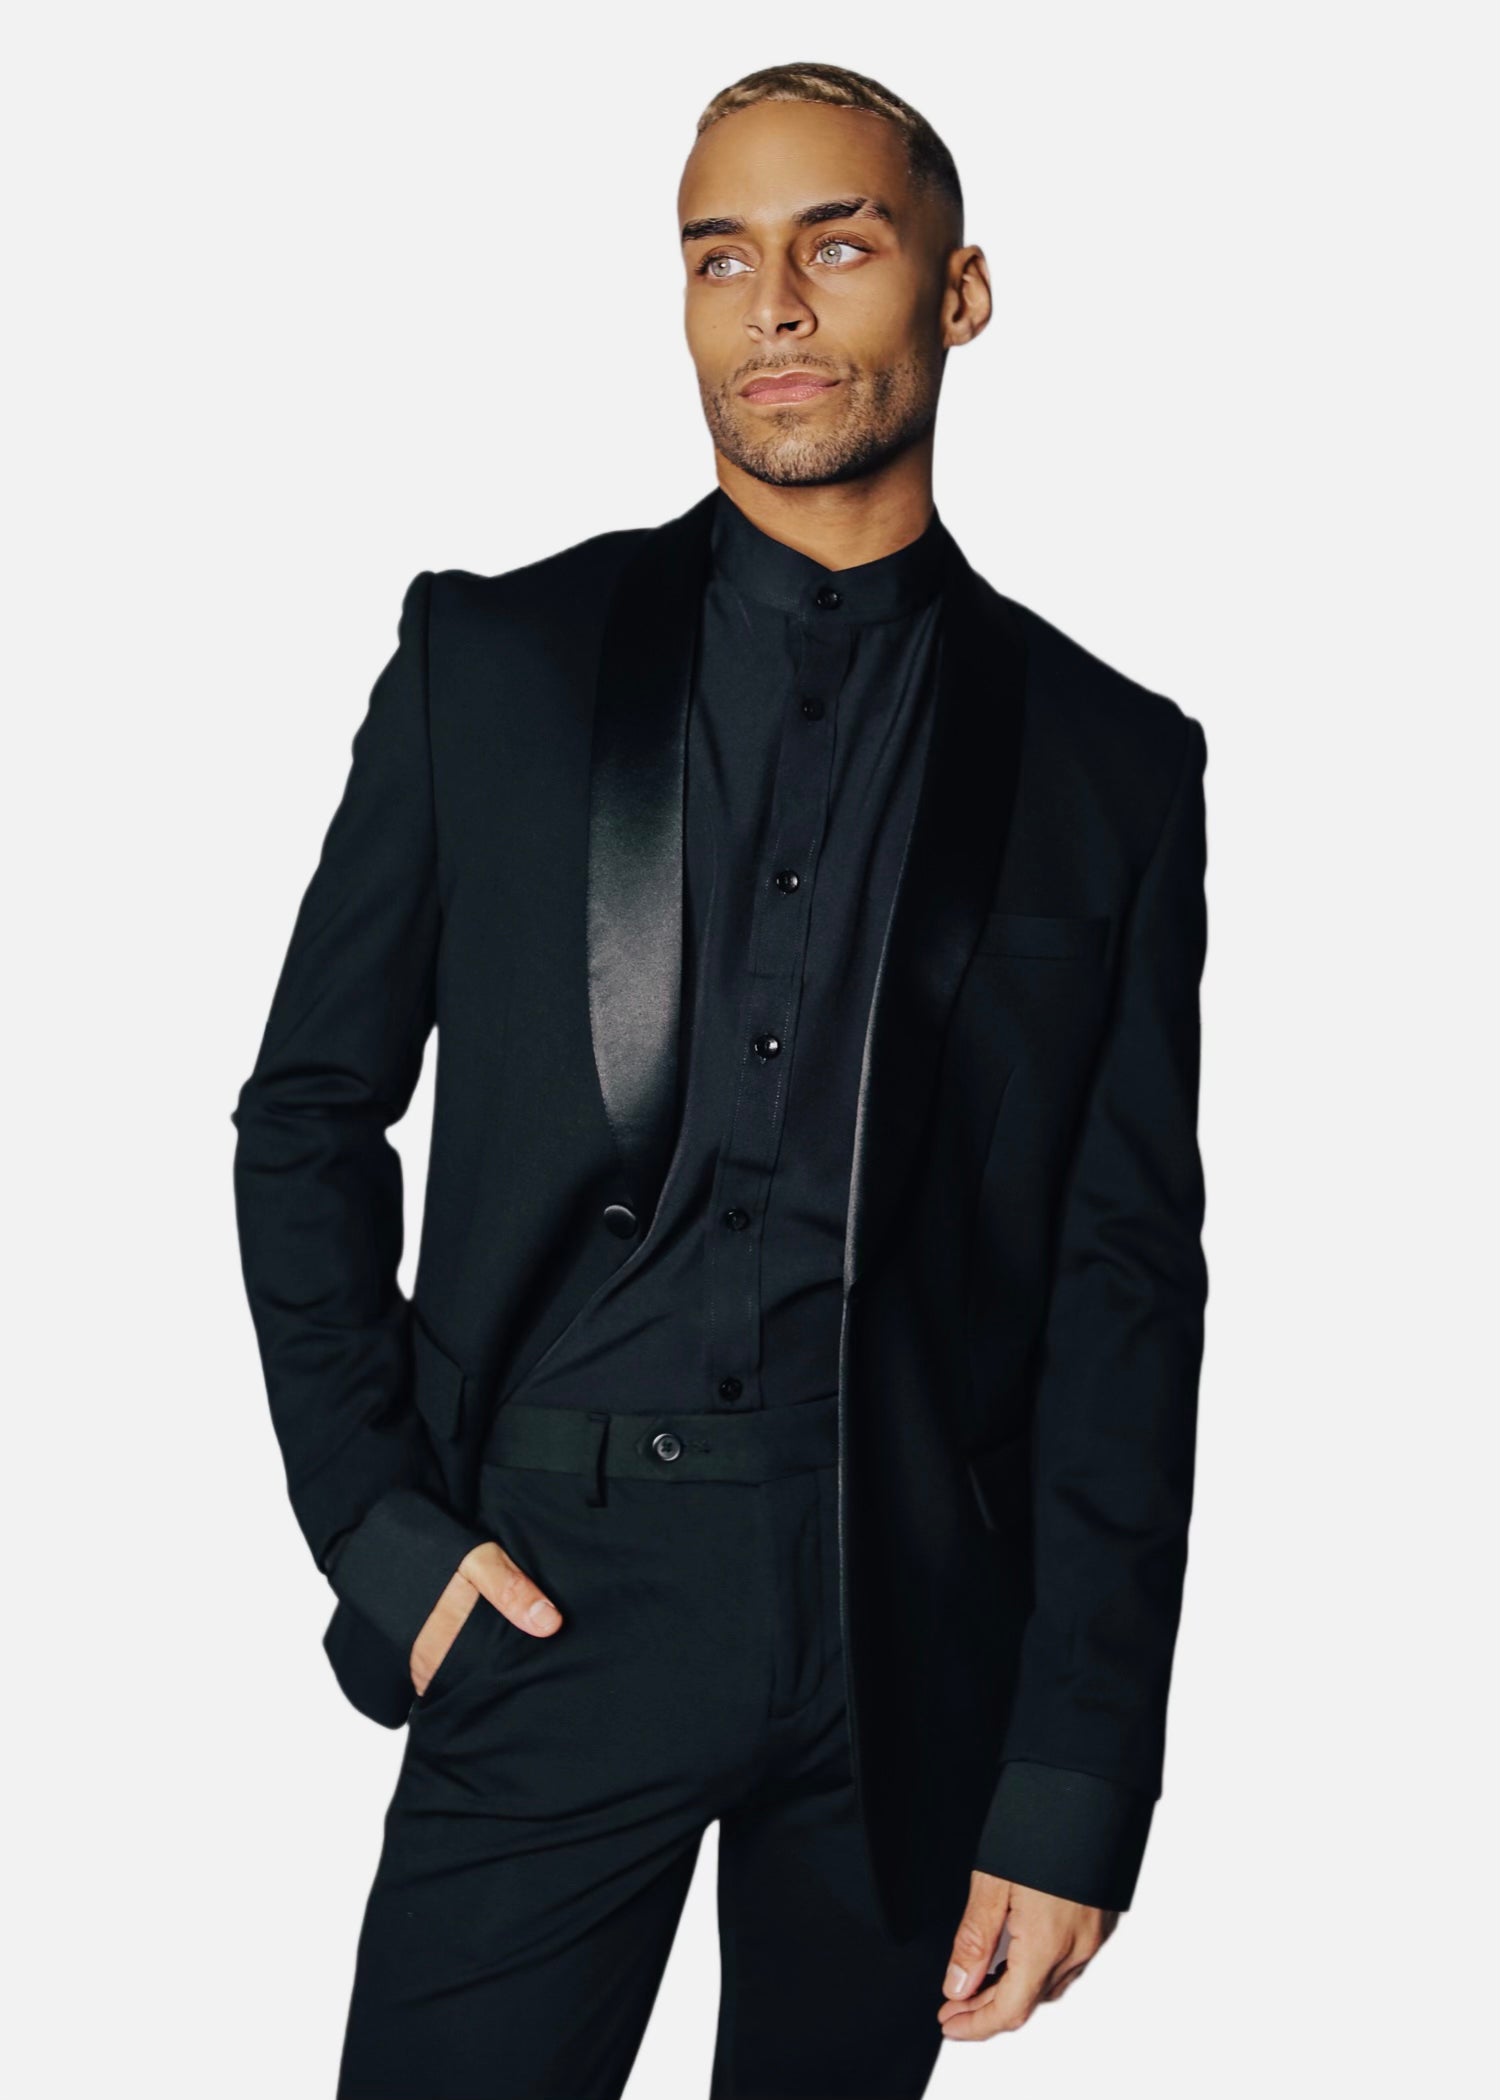 Sophisticated Flex Tailor Black Tuxedo 4-Way Stretch Jacket  showcasing the blend of luxury and flexibility